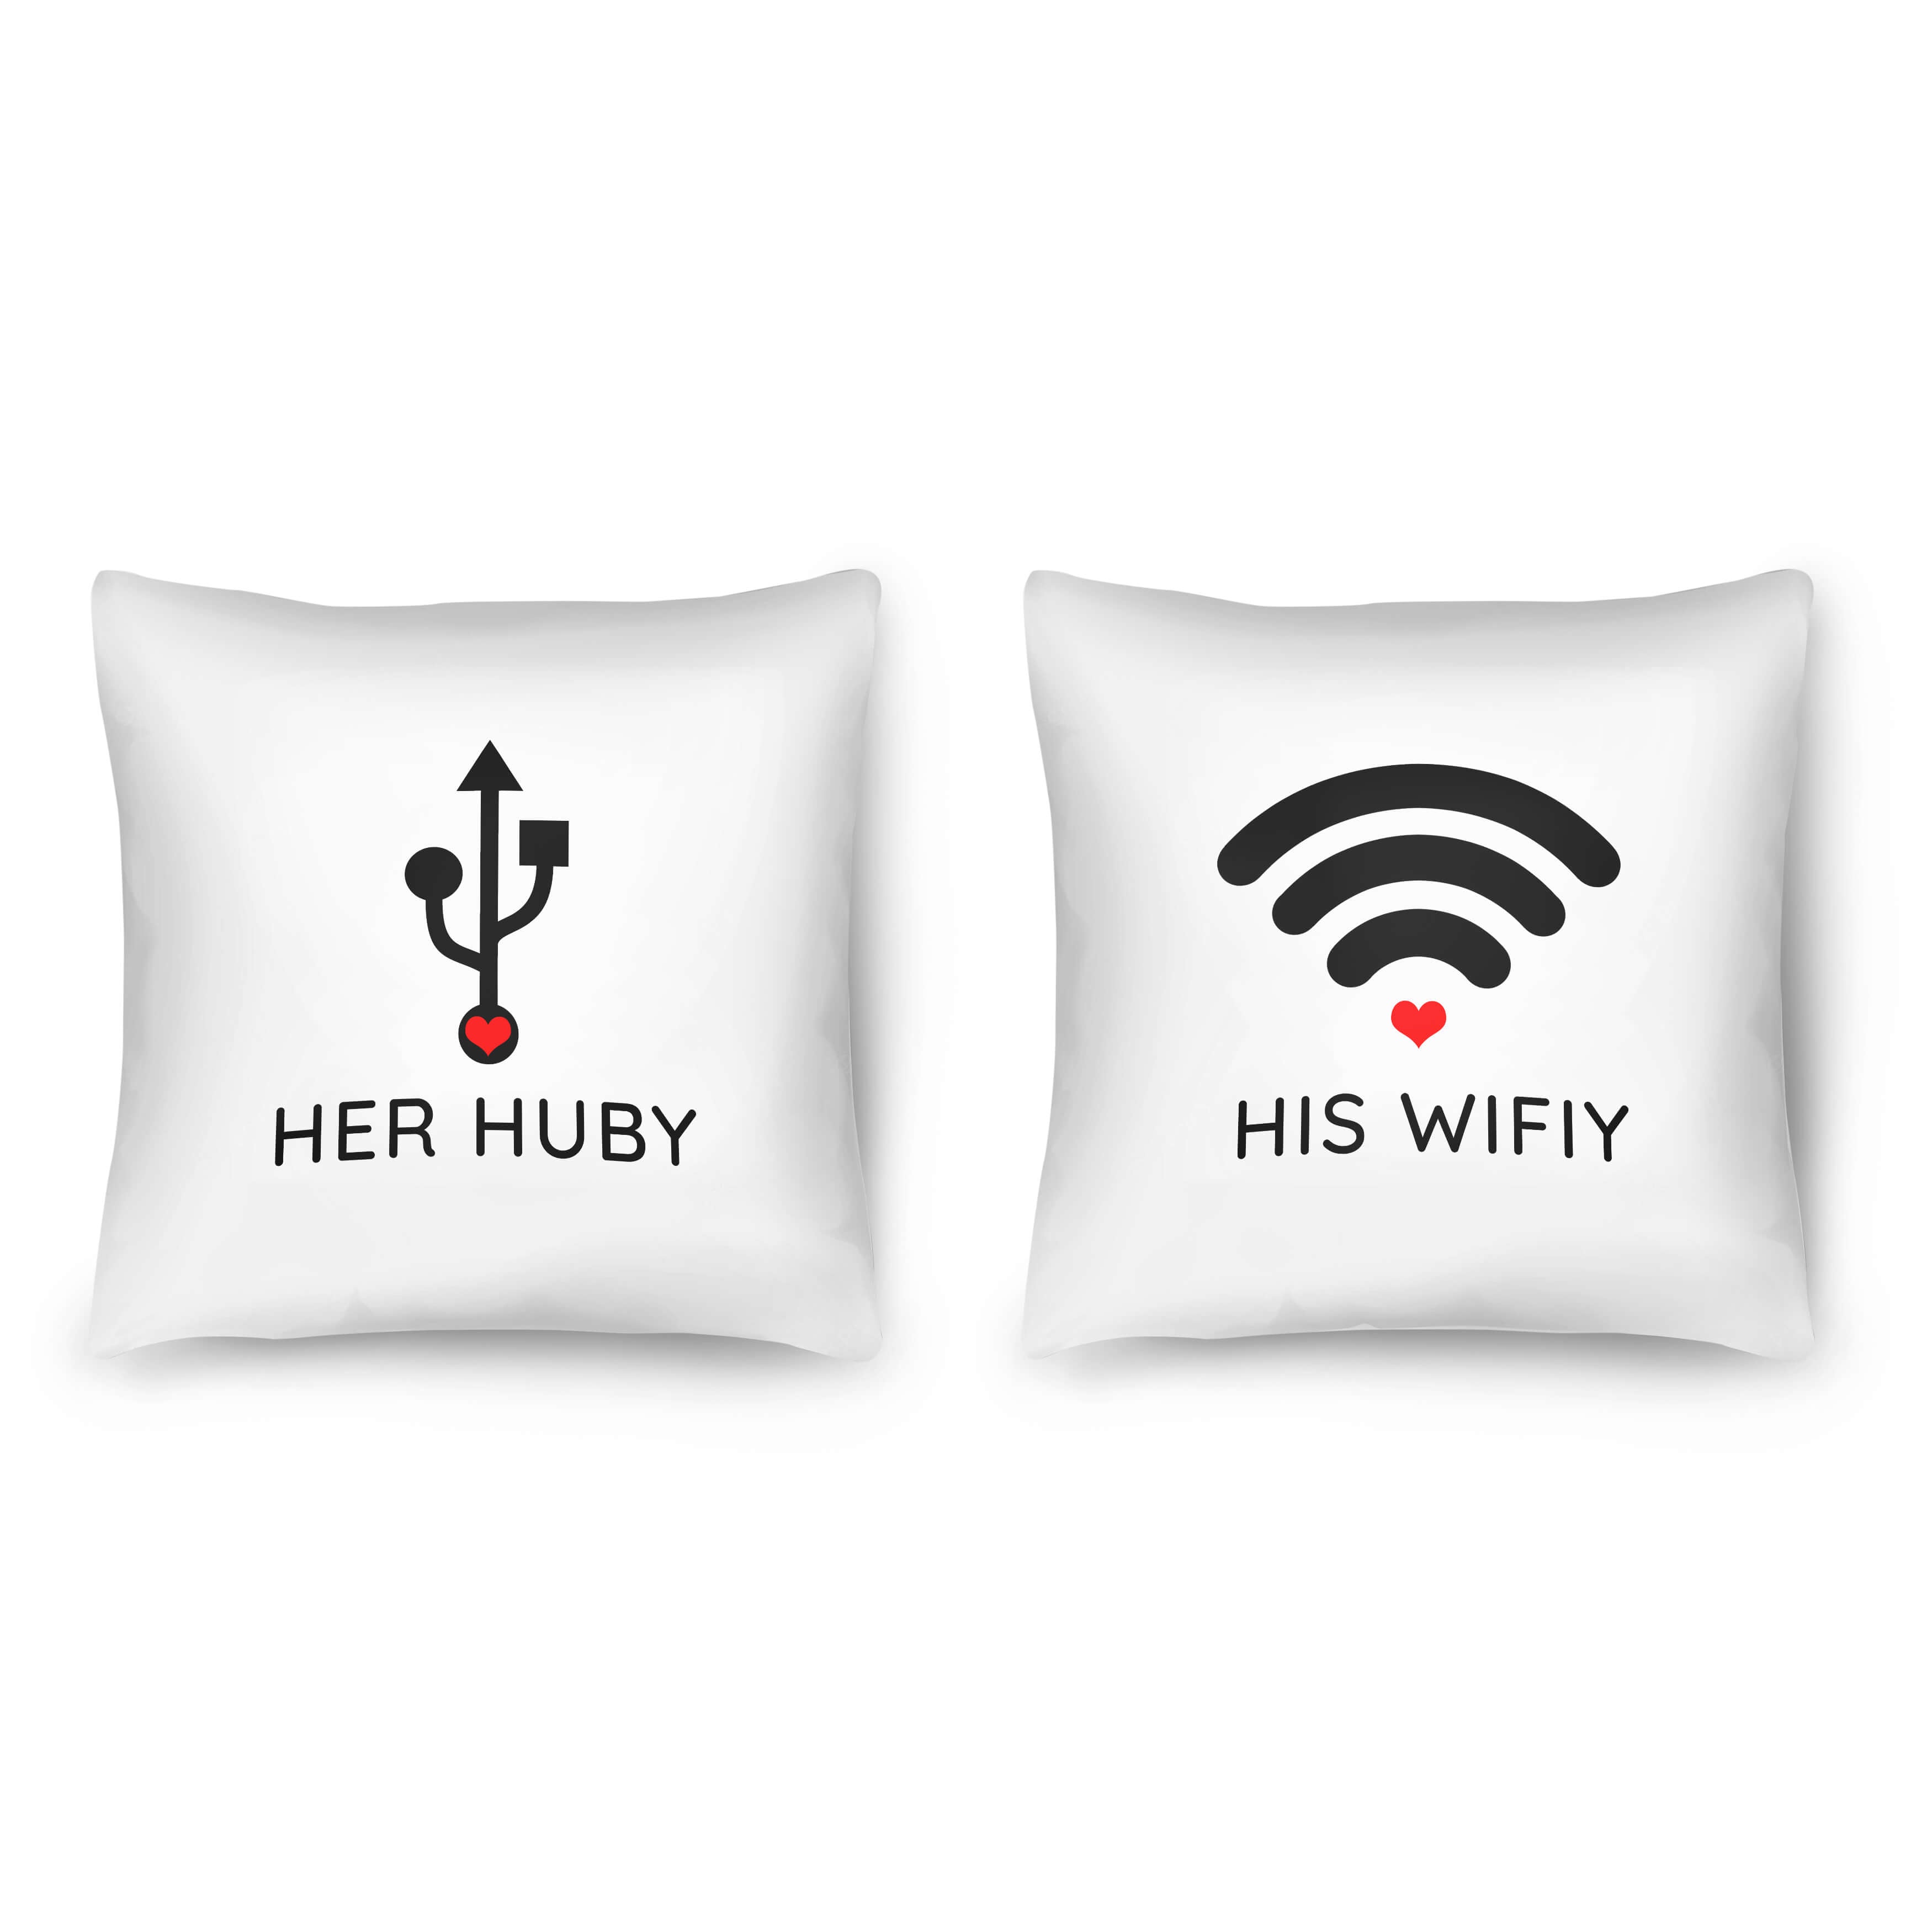 Huby & Wifey A Cushion A / 18 x 18in product thumbnail